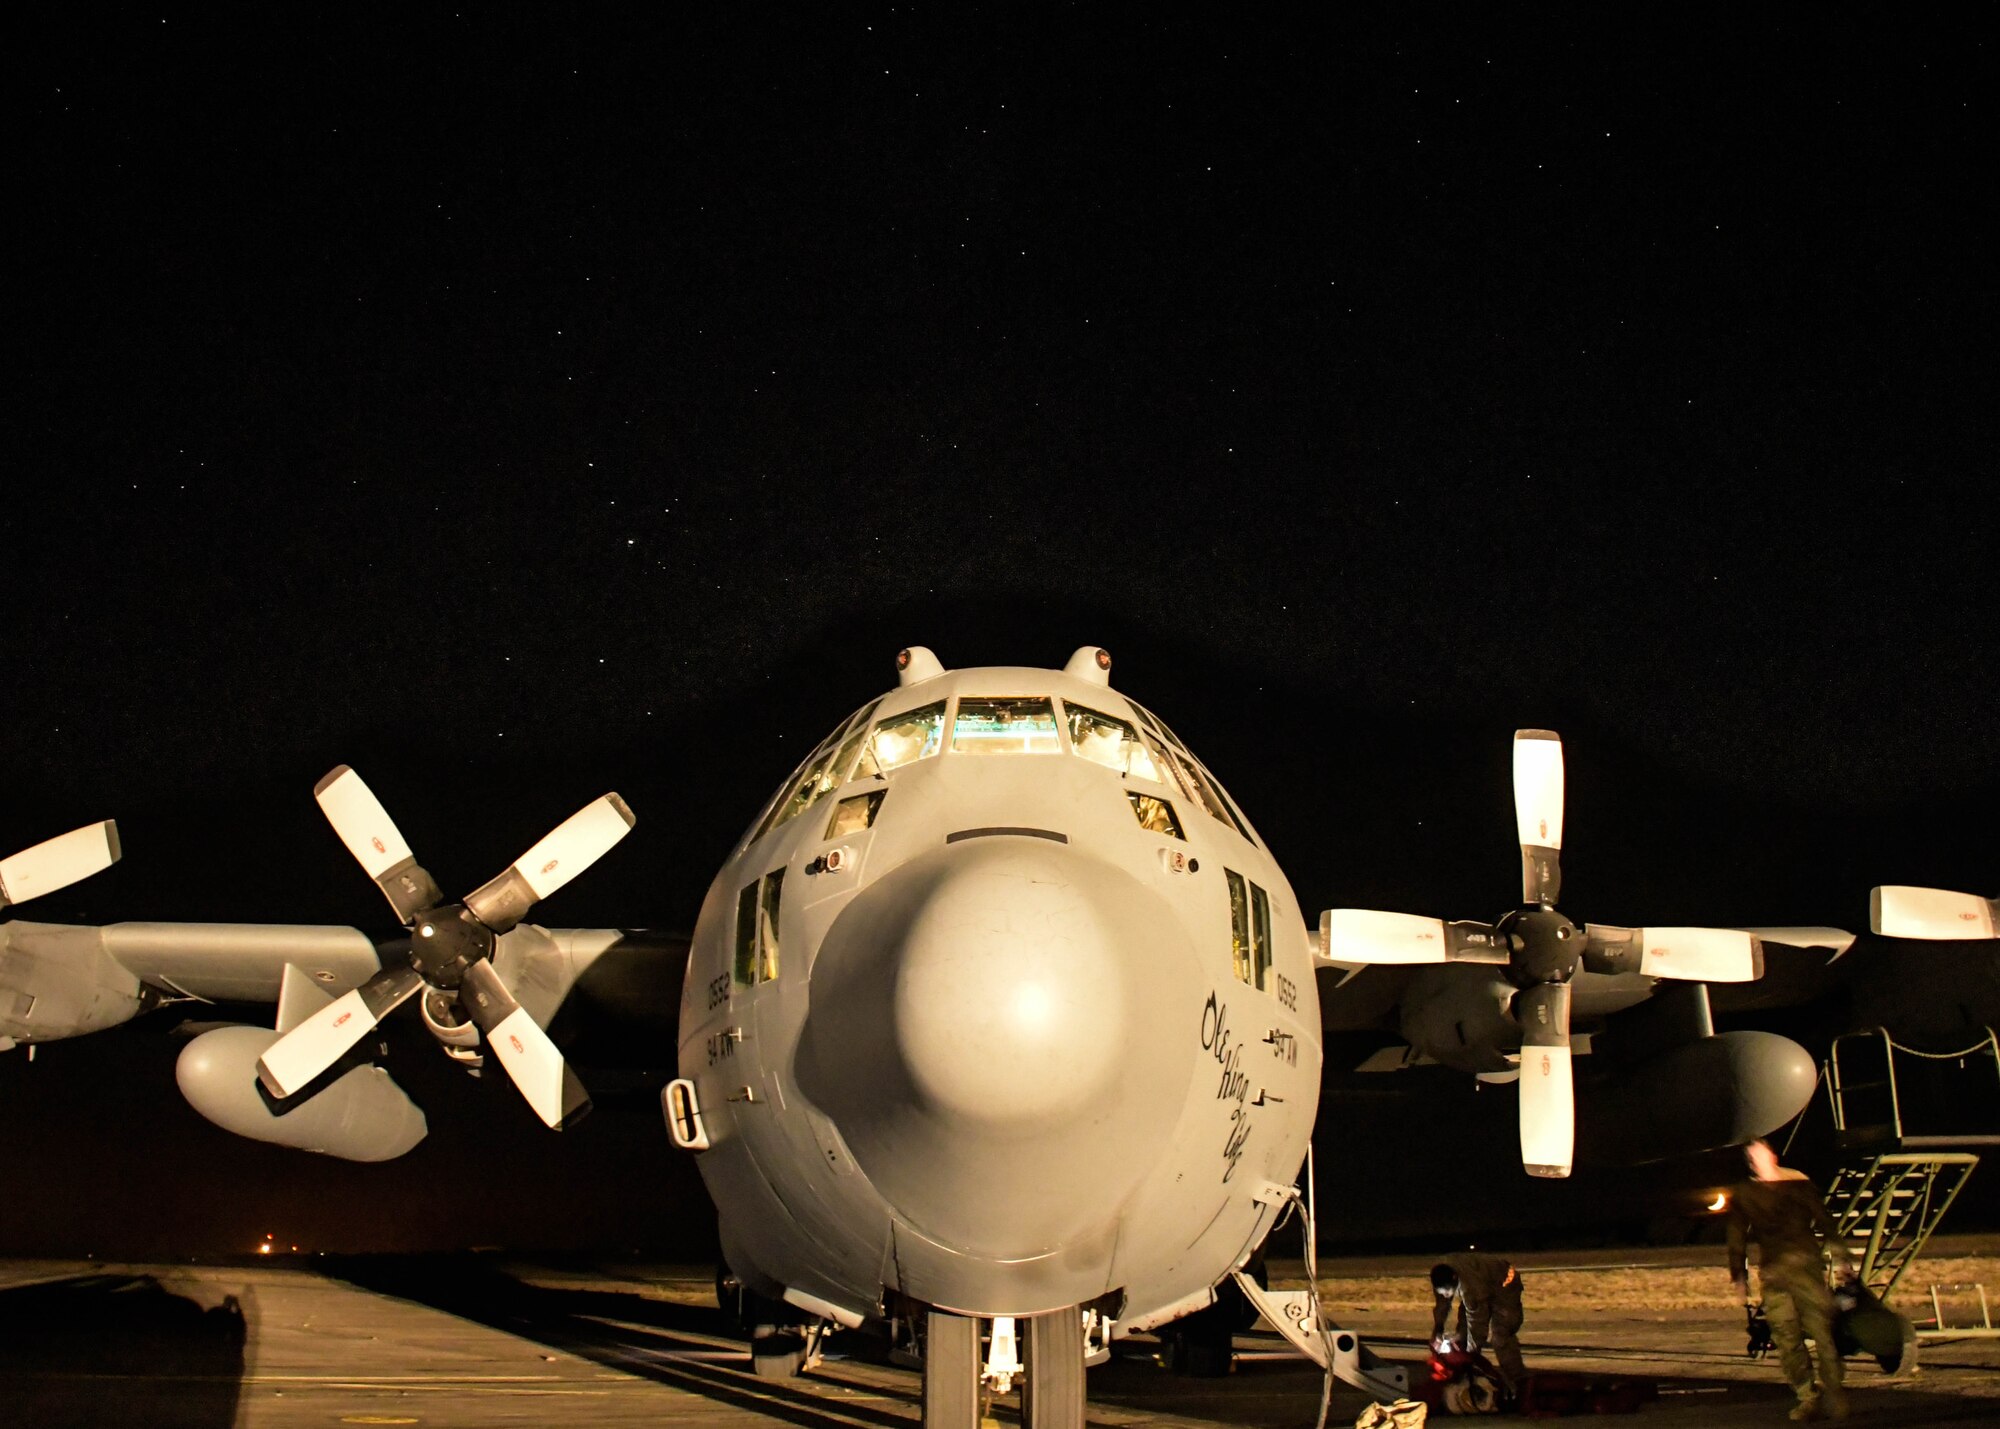 A C-130H3 Hercules from Dobbins Air Reserve Base, Georgia, sits under the stars following a Night Tactical Air-Land mission during Exercise Real Thaw 2019 at Beja Air Base, Portugal, Oct. 2, 2019. Real Thaw is a Portuguese-led large joint and combined force exercise held annually where Dobbins provided aerial support. (U.S. Air Force photo/Senior Airman Josh Kincaid)